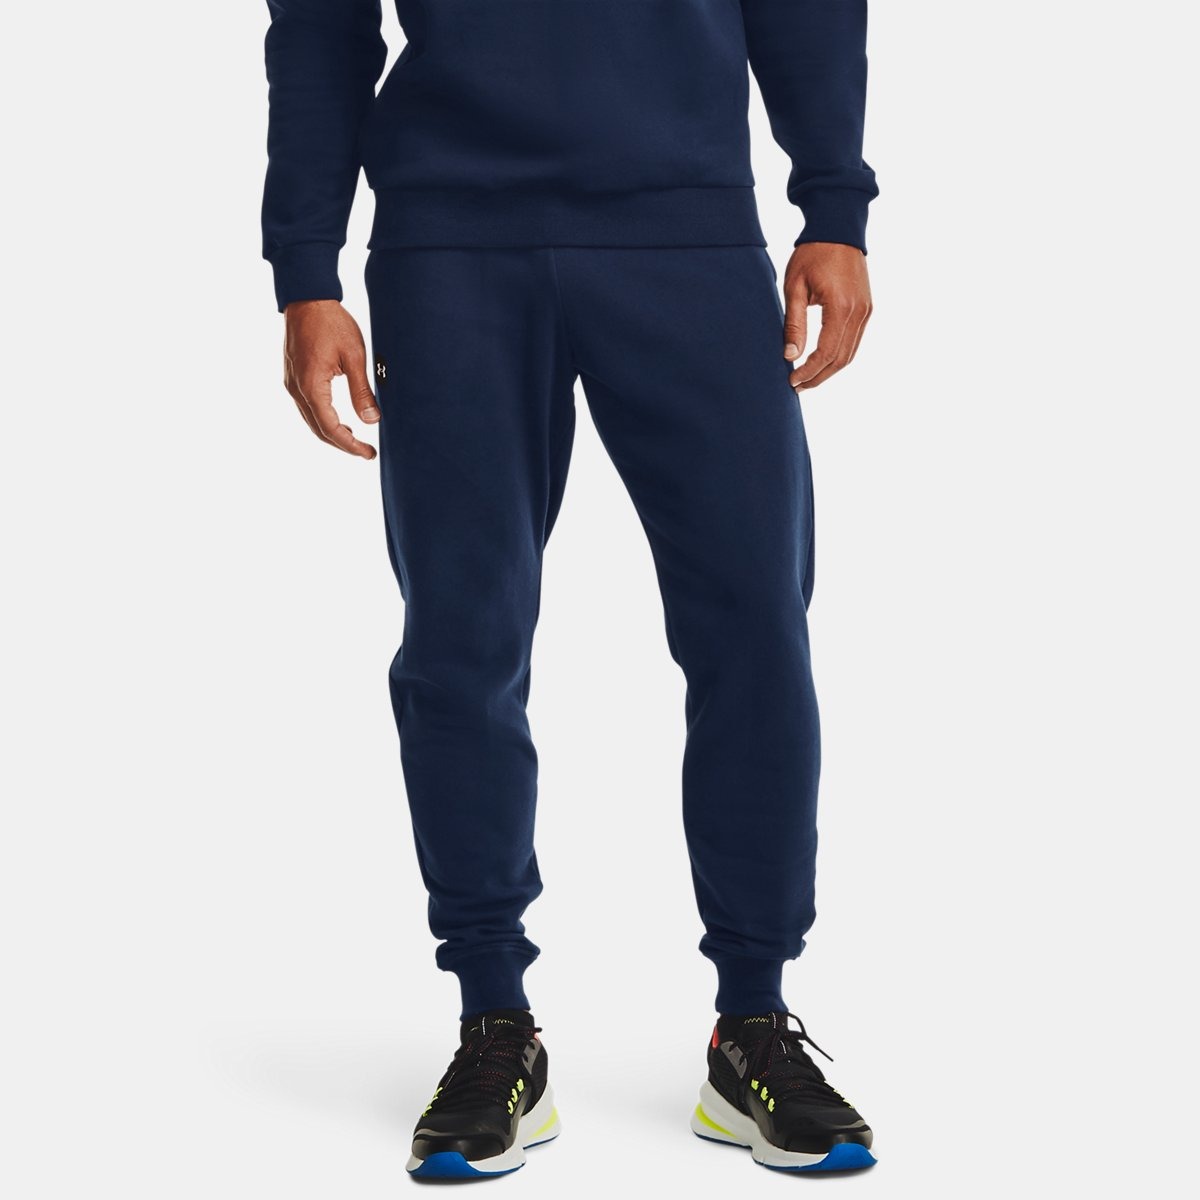 Gent Blue Joggers at Under Armour GOOFASH